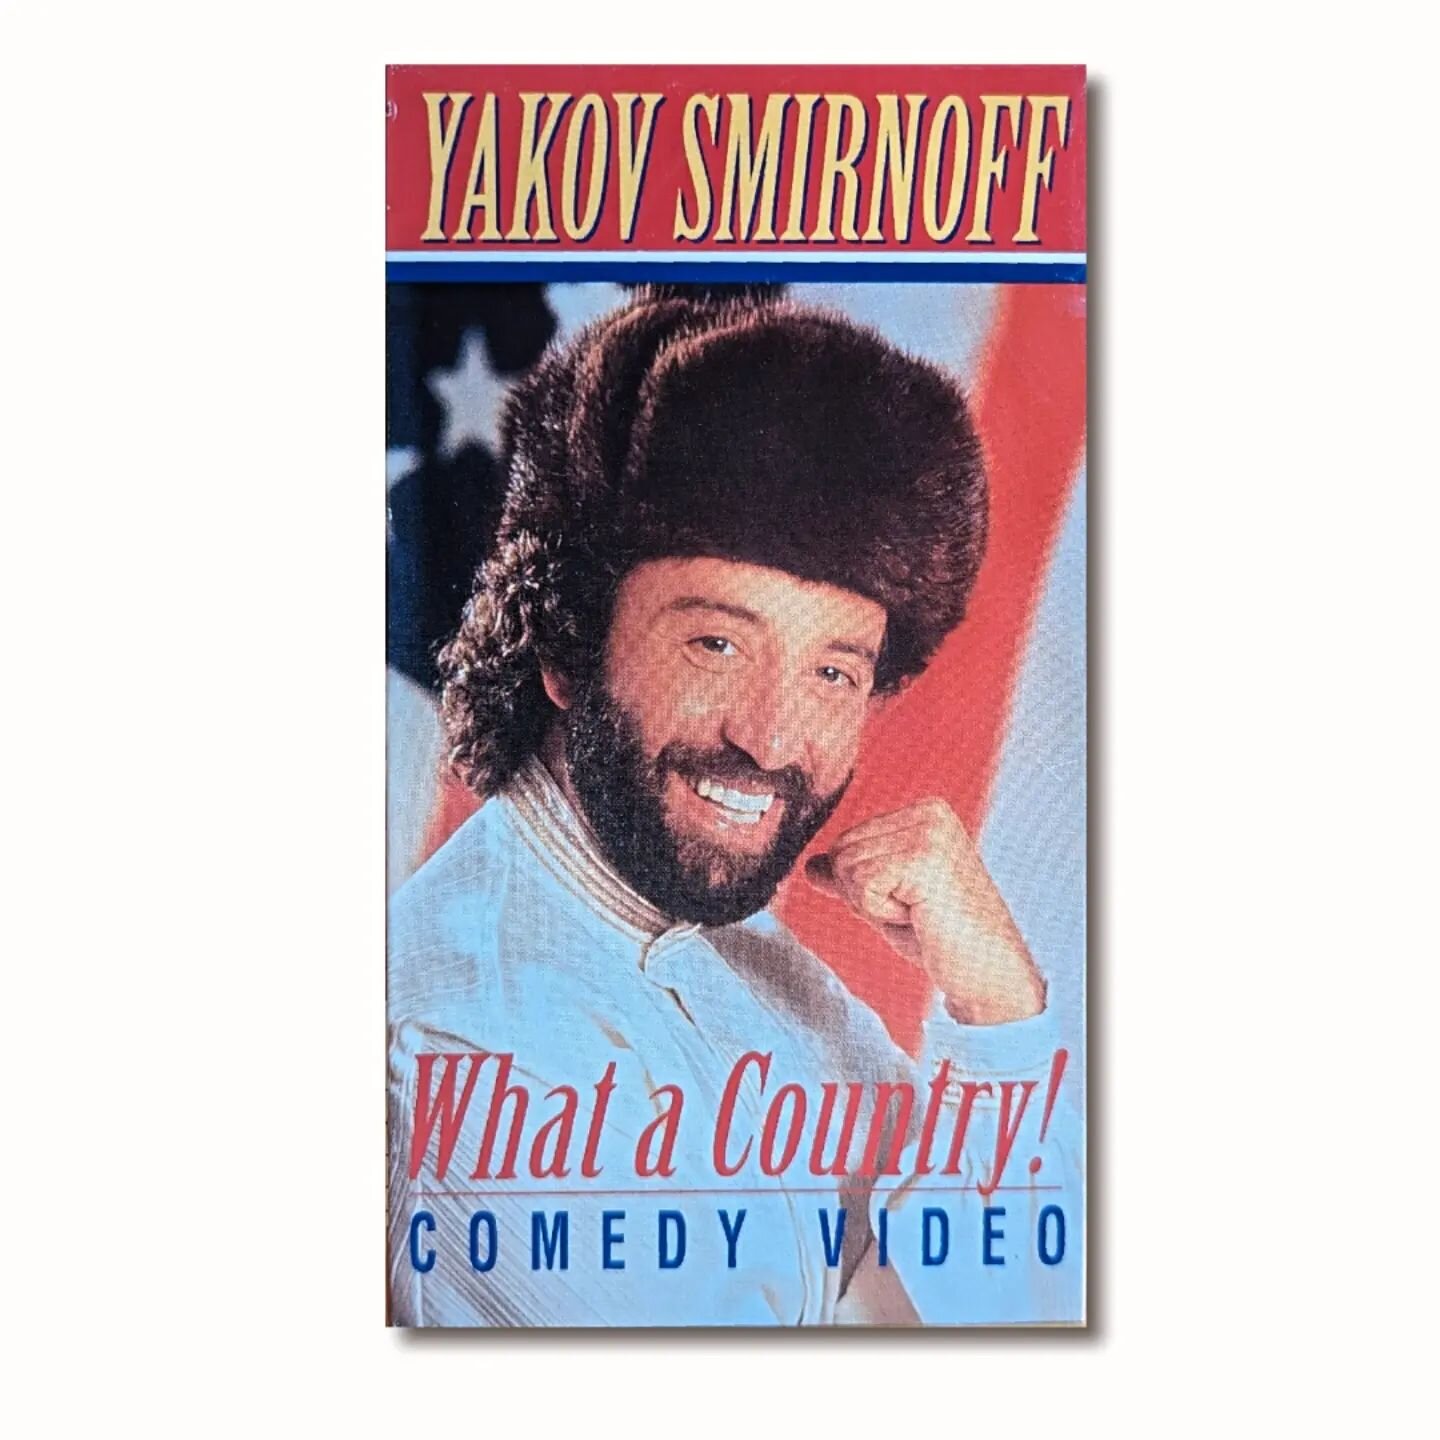 Yakov Smirnoff - The classic comedy tape you never knew you needed. A wholesome precursor to Borat and a fan favorite of both Nancy Reagan and Barbara Bush a like. How could this be bad ?! (It might be bad). But that's good 🤷🏻&zwj;♂️?